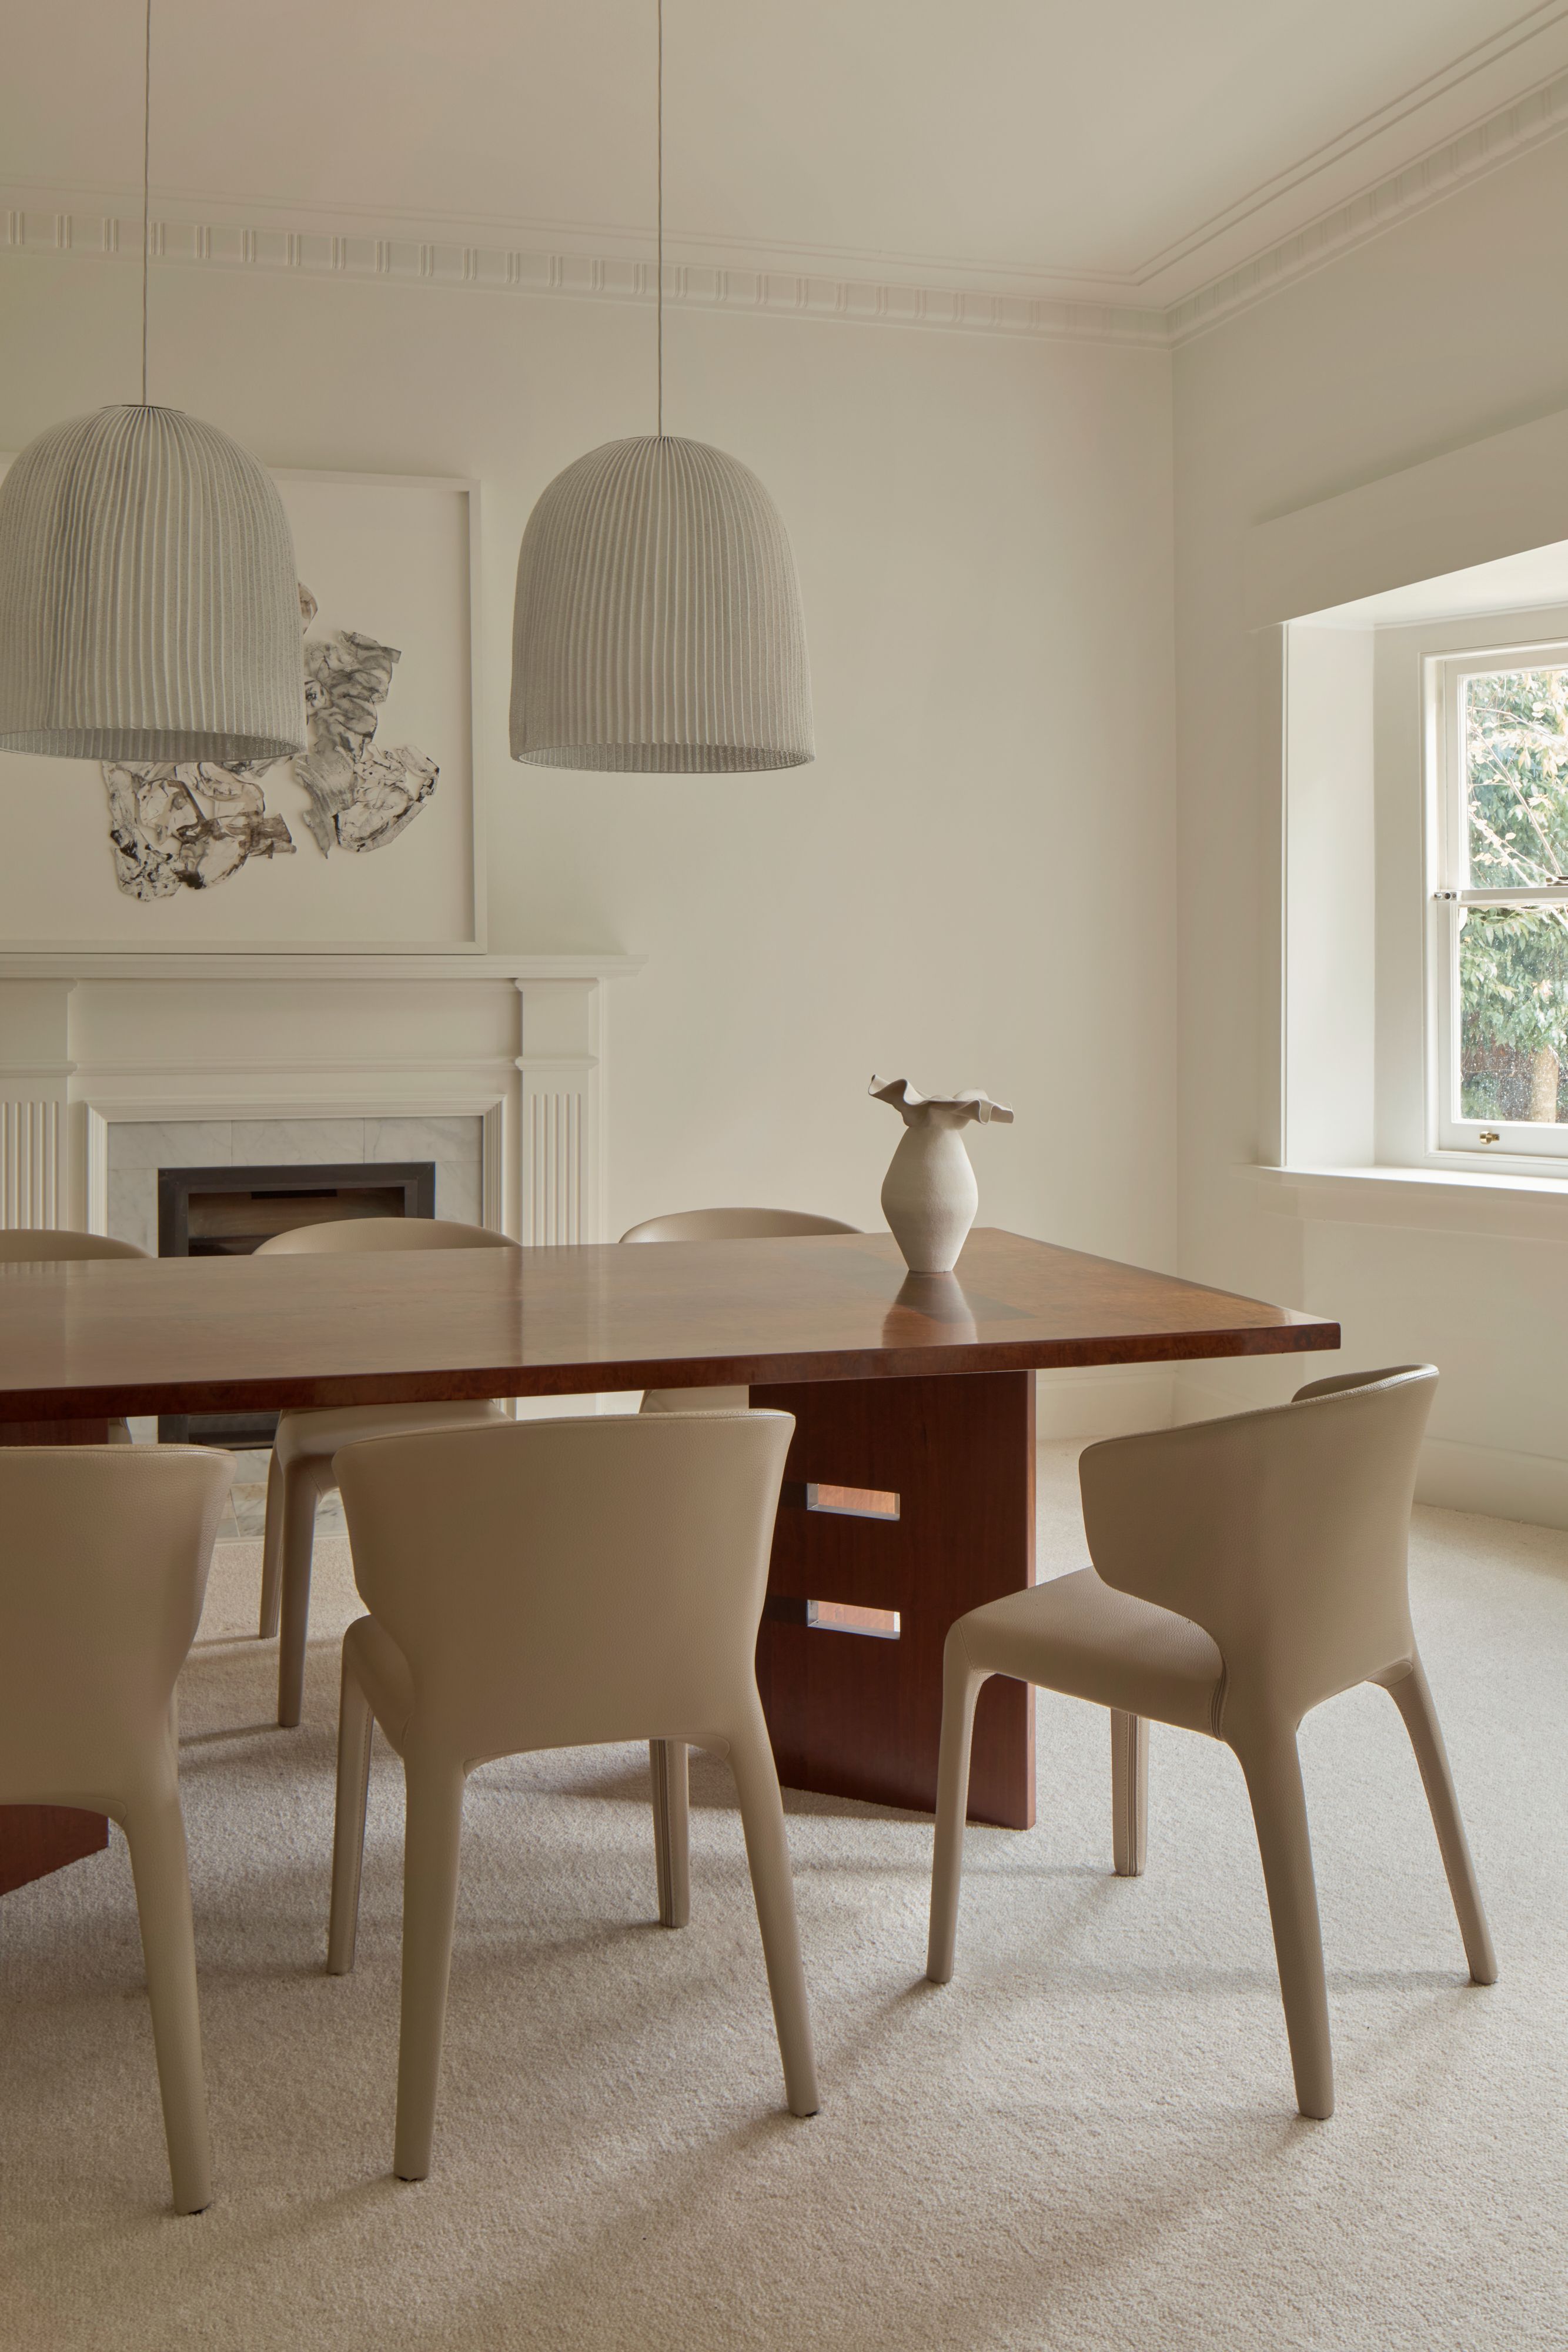 image of Kent House - Formal dining room
